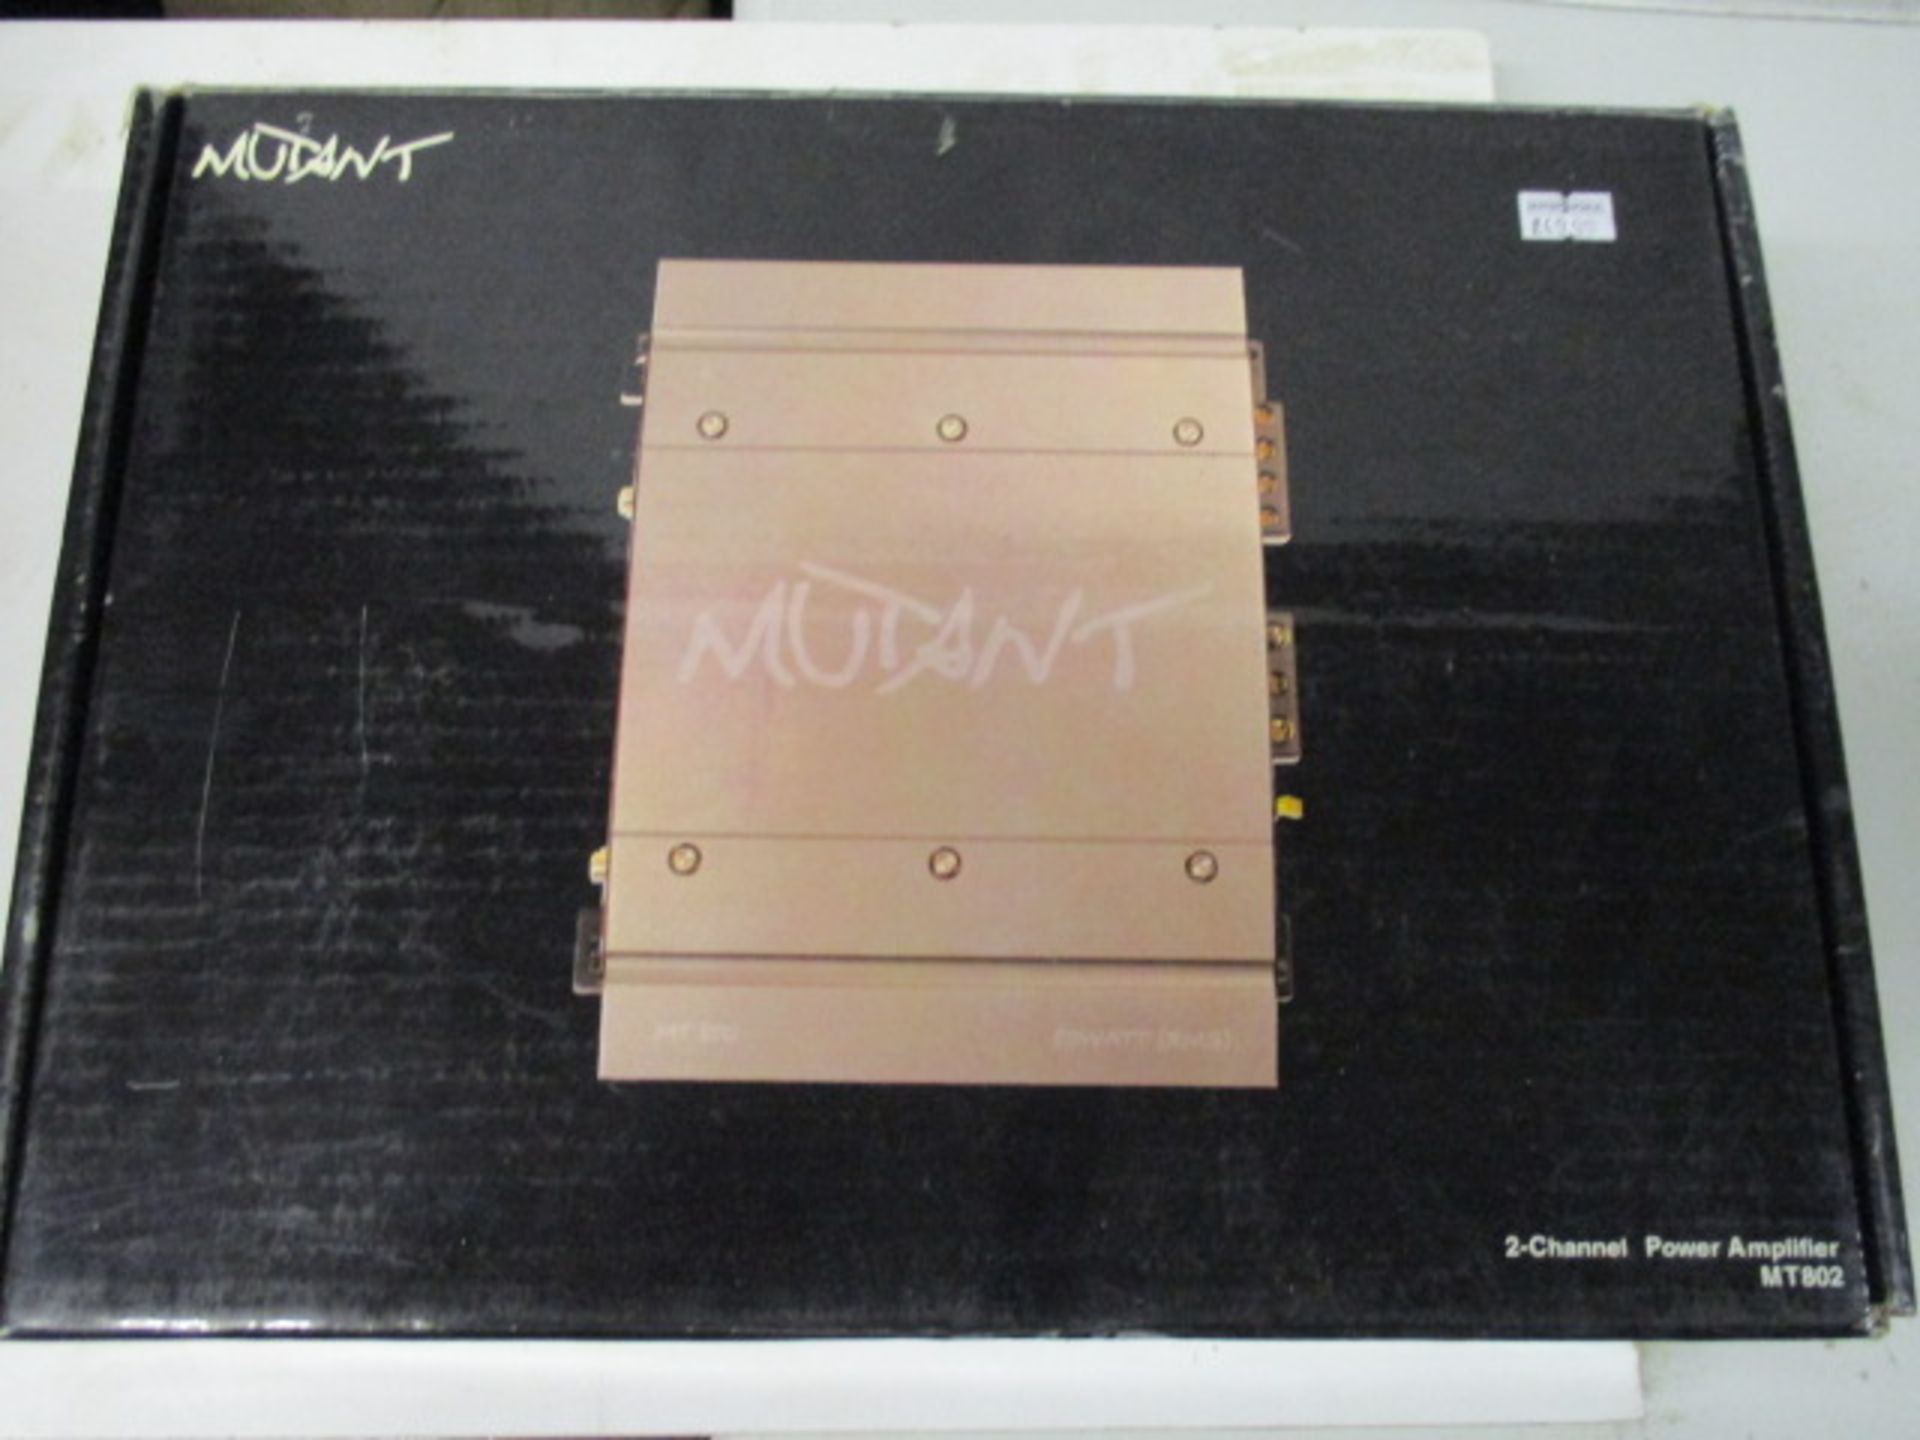 Mutant MT802 amplifier unit -2 channel crystal clear sound boxed and new rrp £49.99